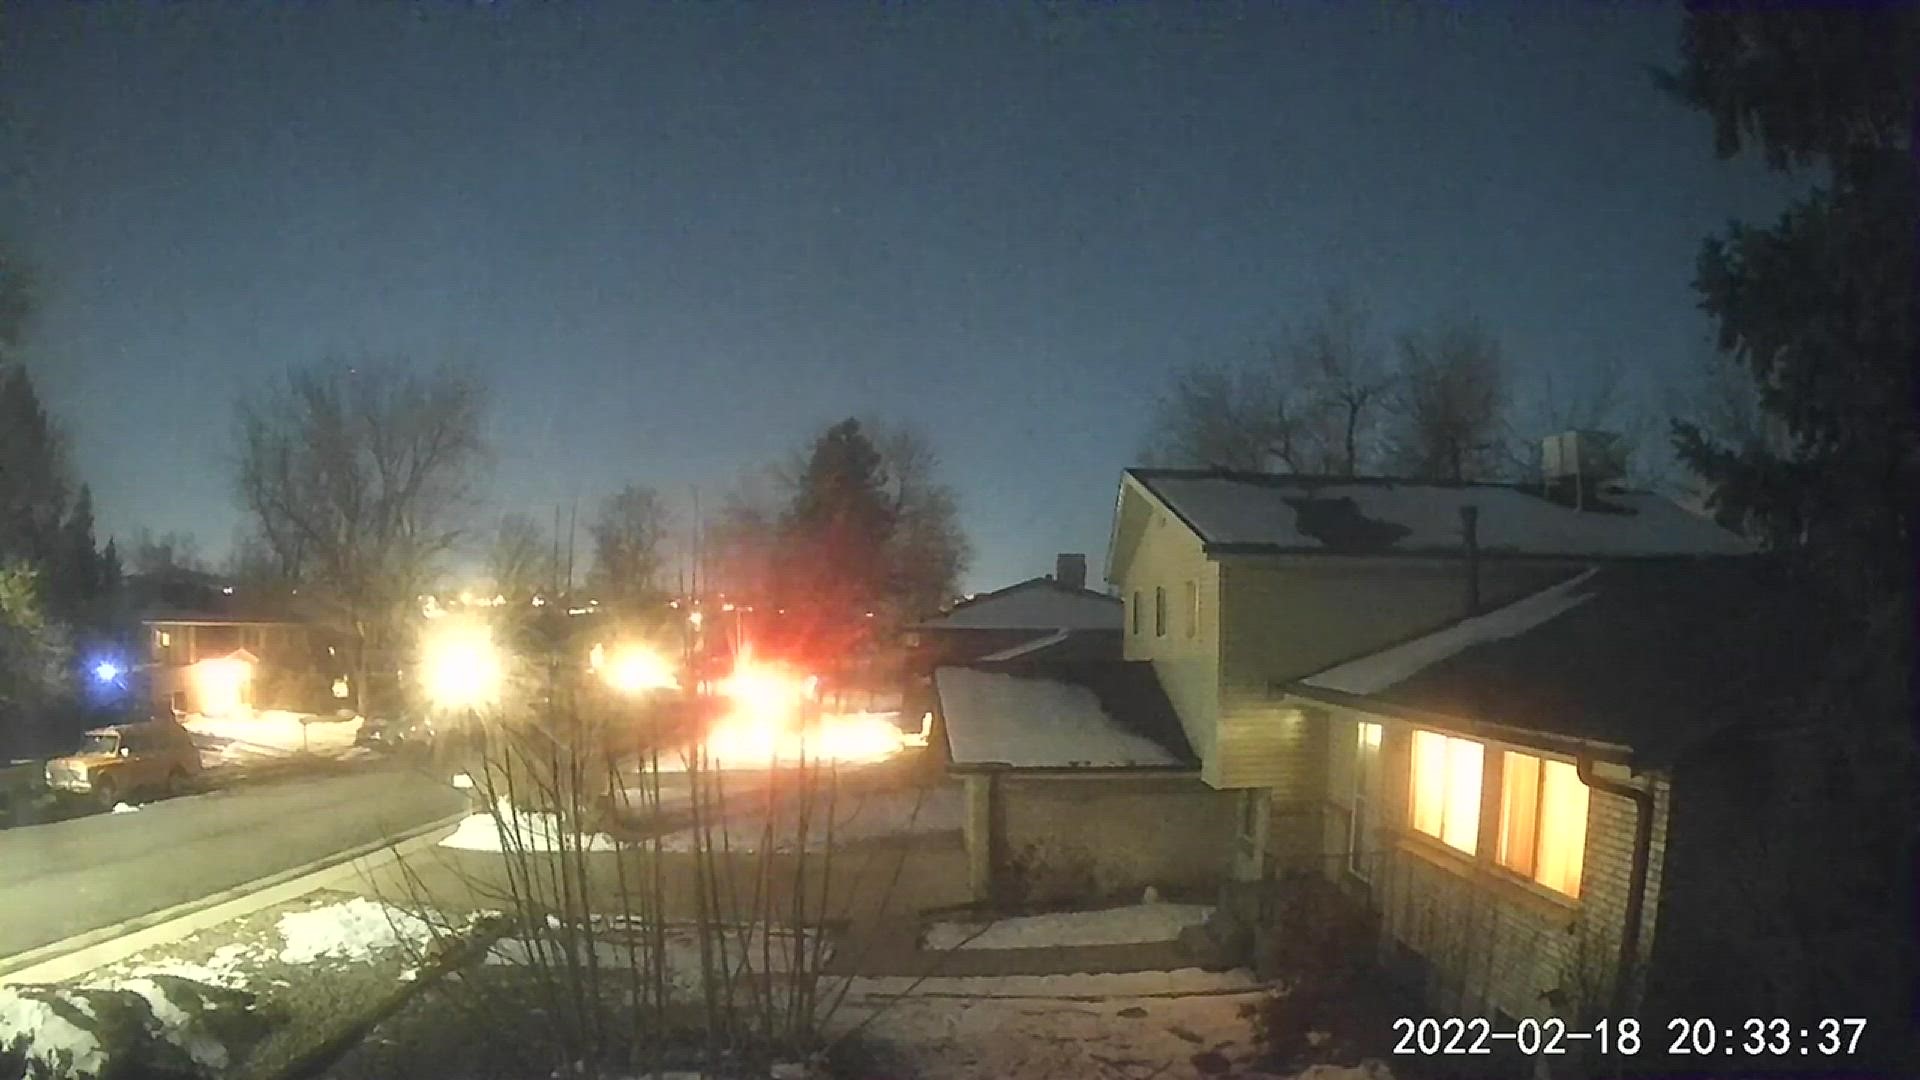 The American Meteor Society said they received 30 reports of a fireball seen over Colorado on Saturday, which is a type of meteor. This video comes from Arvada.